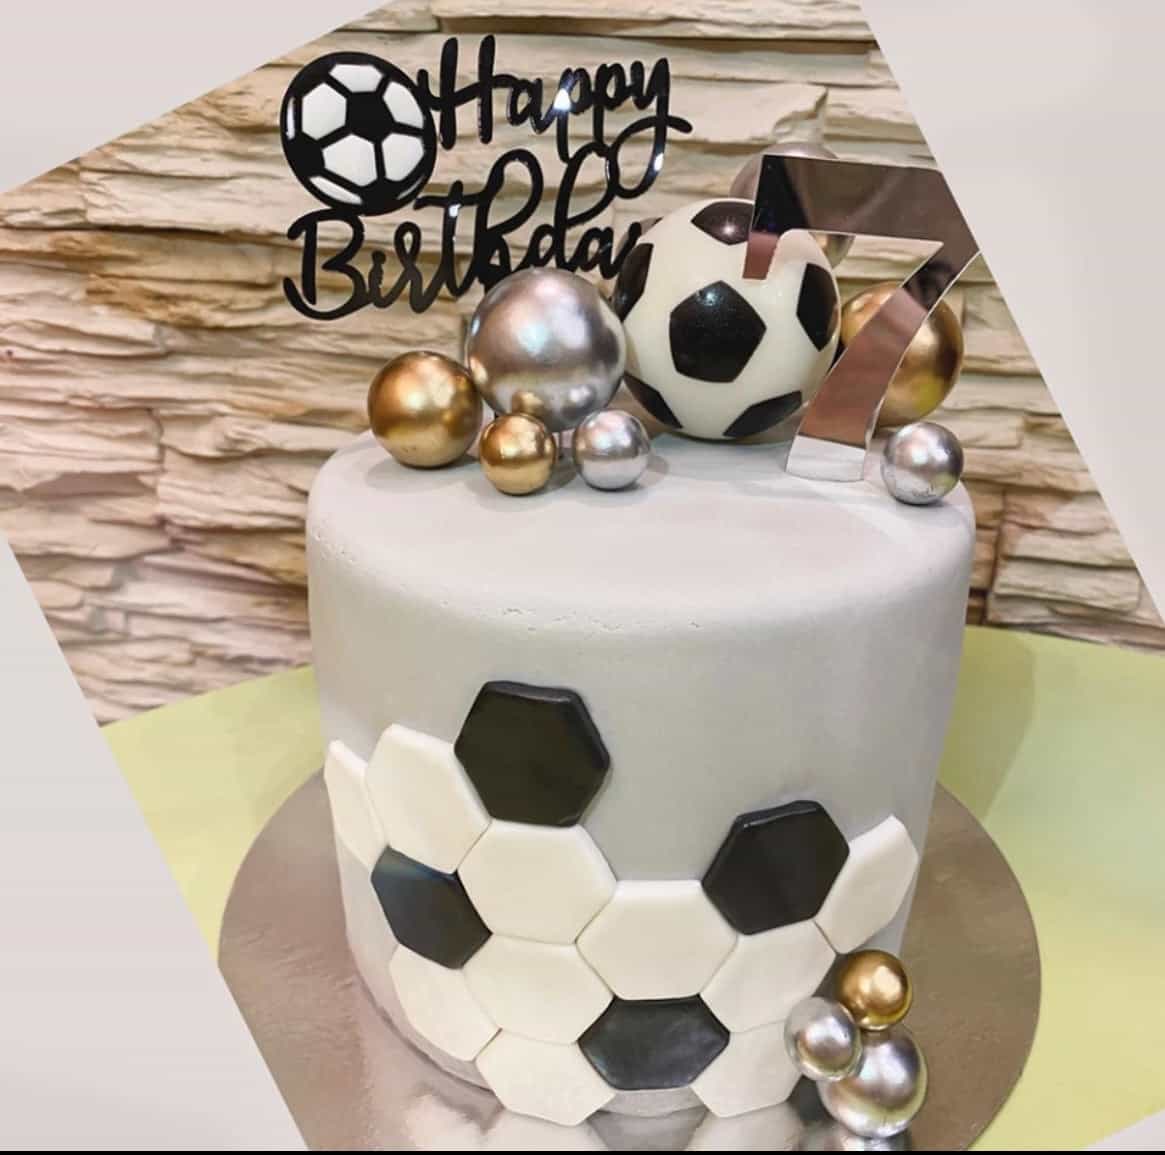 Amazon.com: 28 PCS Soccer Cake Topper Soccer Ball Player Cake Decorations  for Soccer Birthday Party Sport Party Supplies : Grocery & Gourmet Food